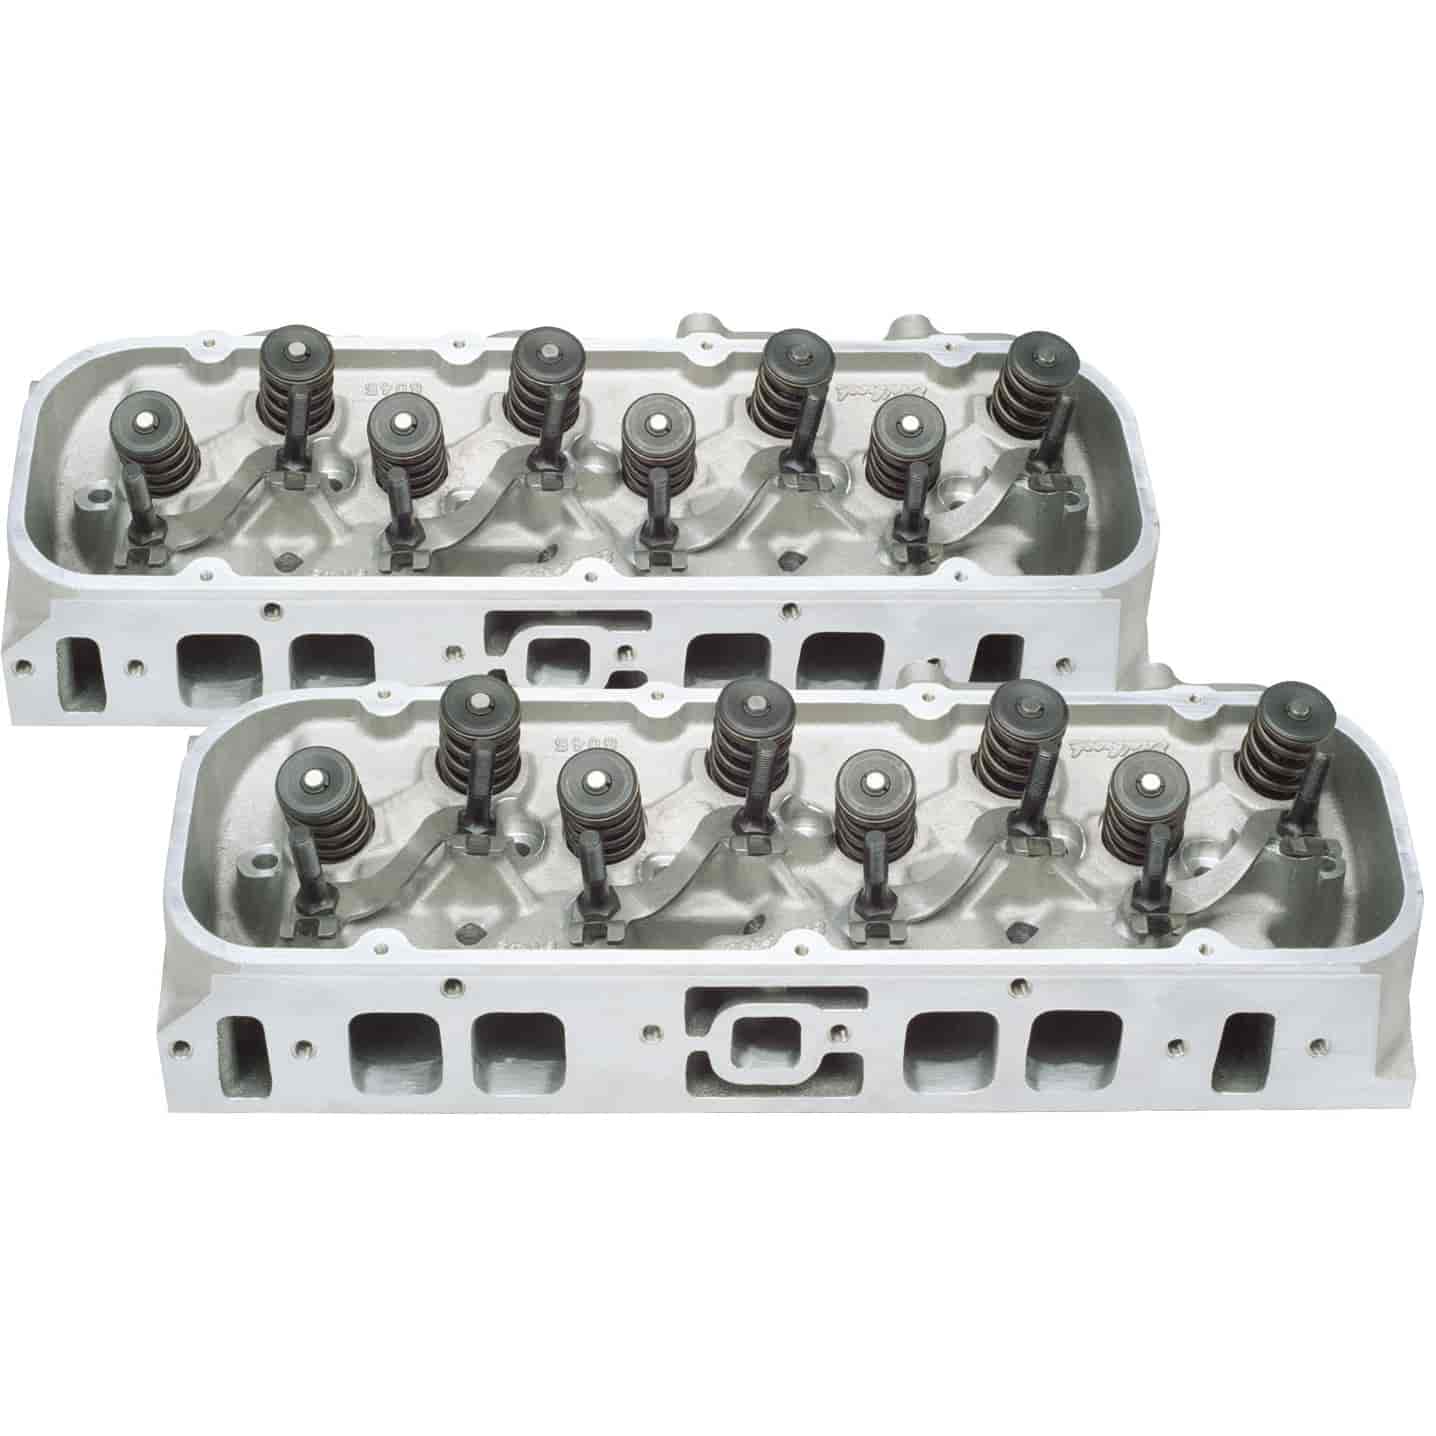 Street Legal Performer Cylinder Heads Big Block Chevy 454-Oval Port